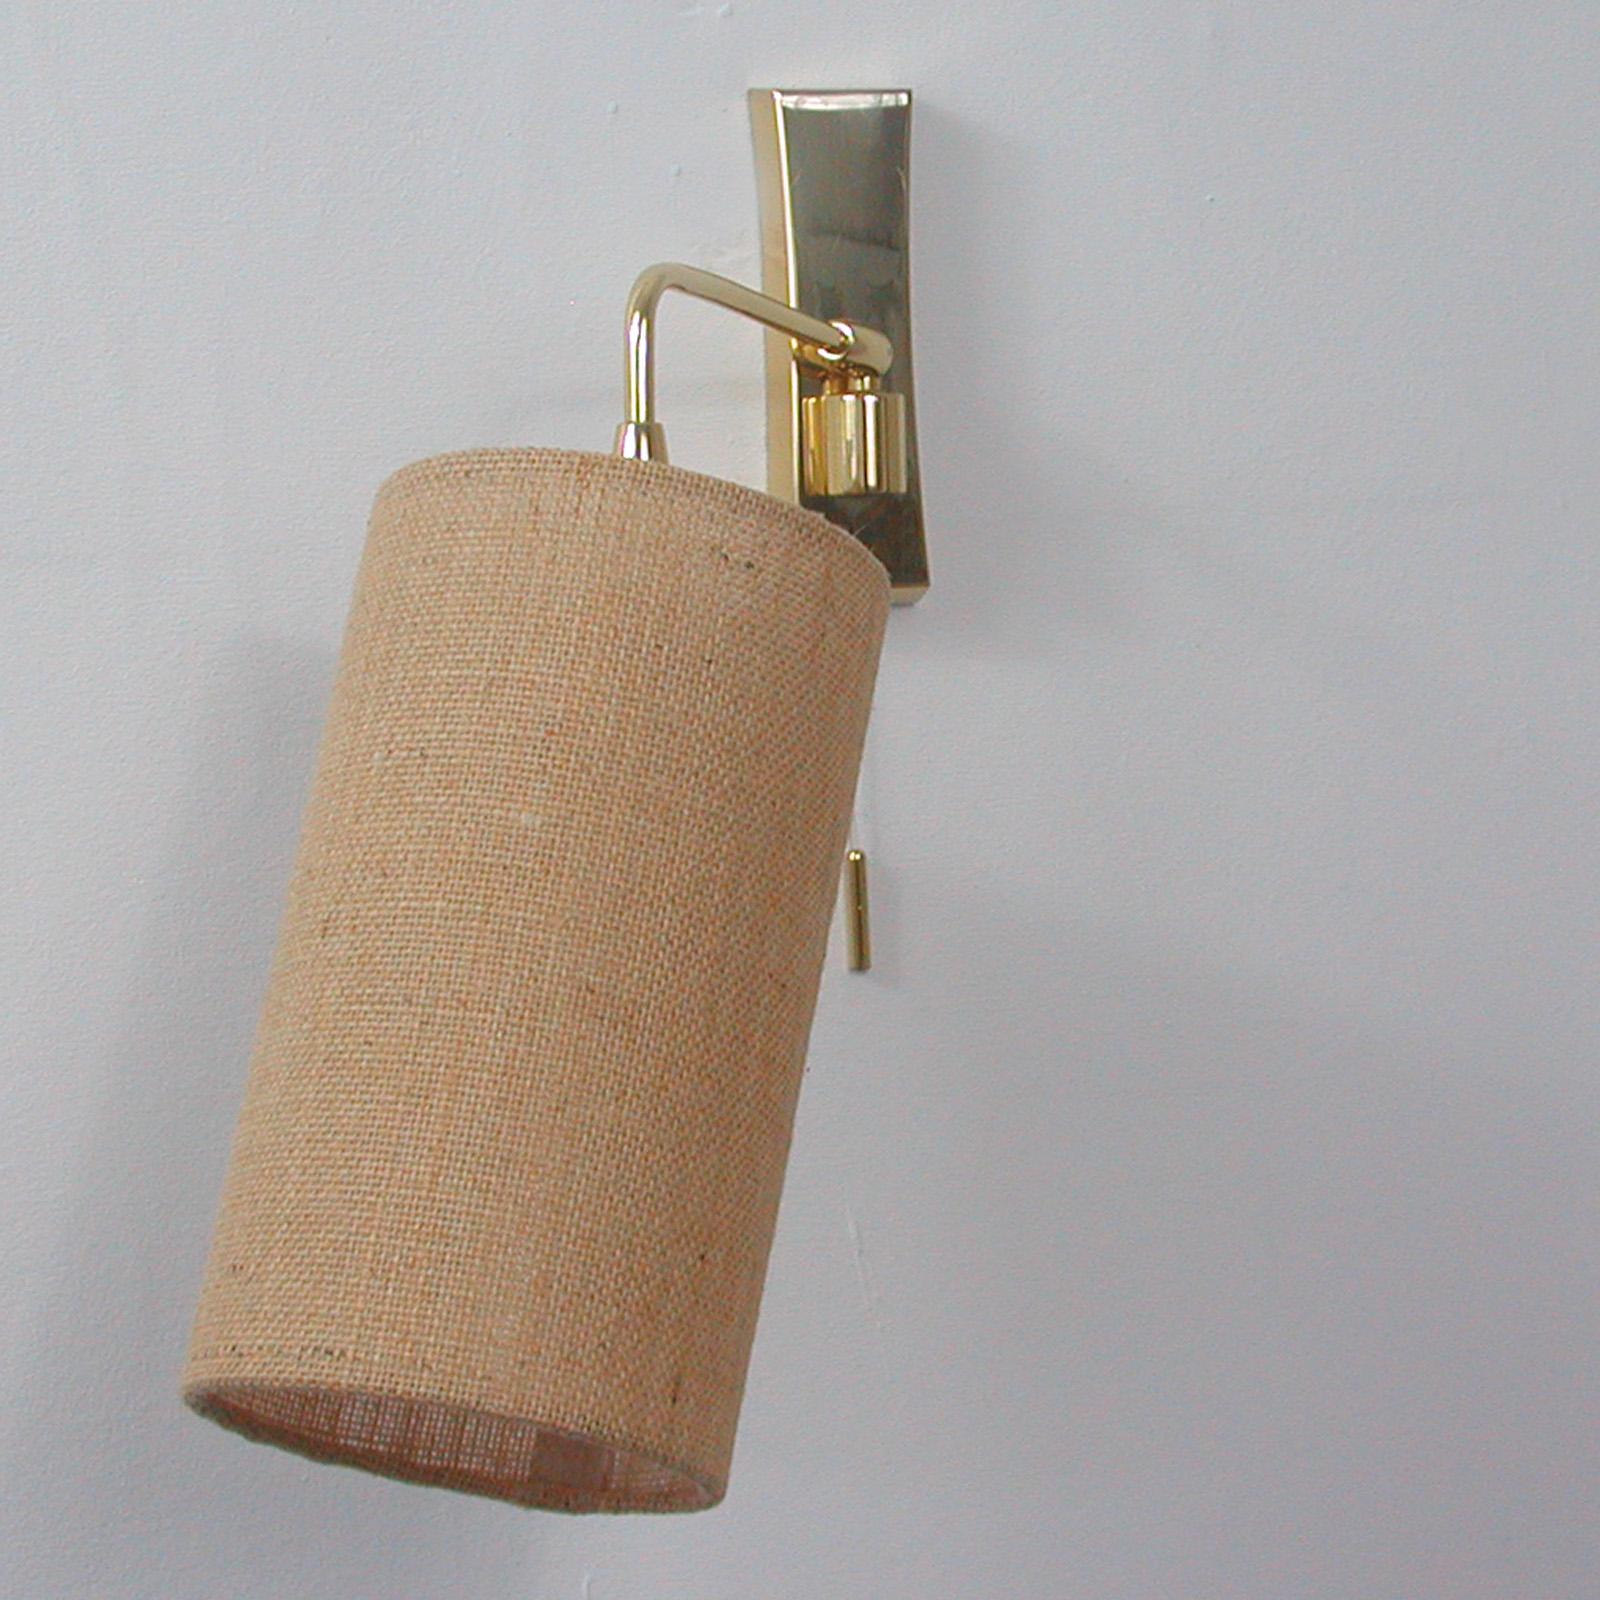 Midcentury Brass and Sisal Adjustable Sconce, Kalmar Attributed., Austria, 1960s For Sale 7